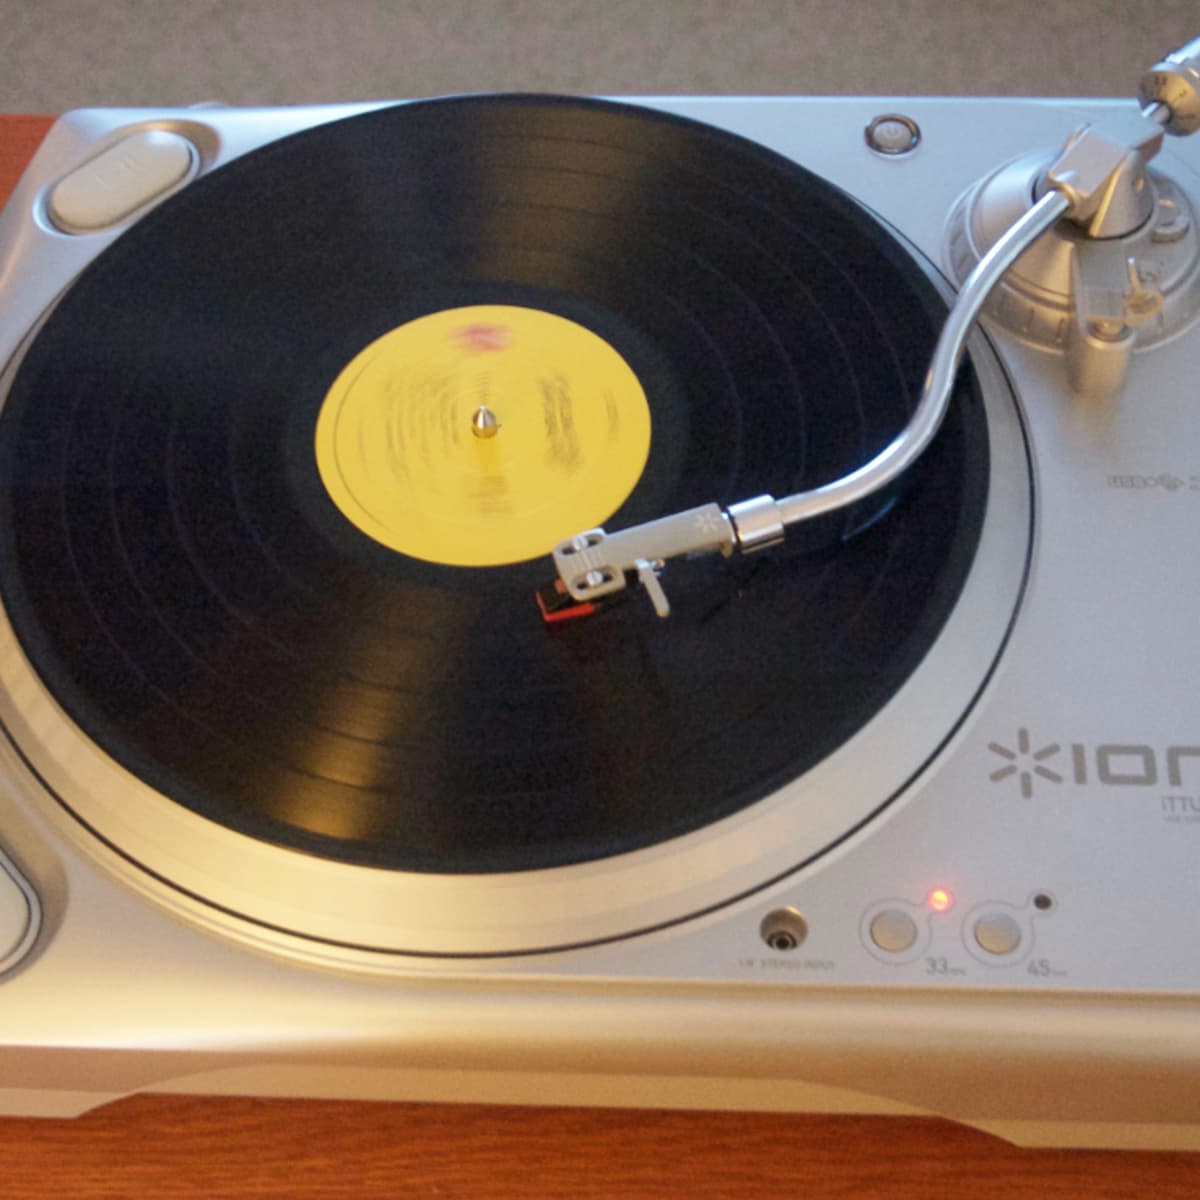 How to Convert Vinyl Records to MP3 or A Step-by-Step - TurboFuture